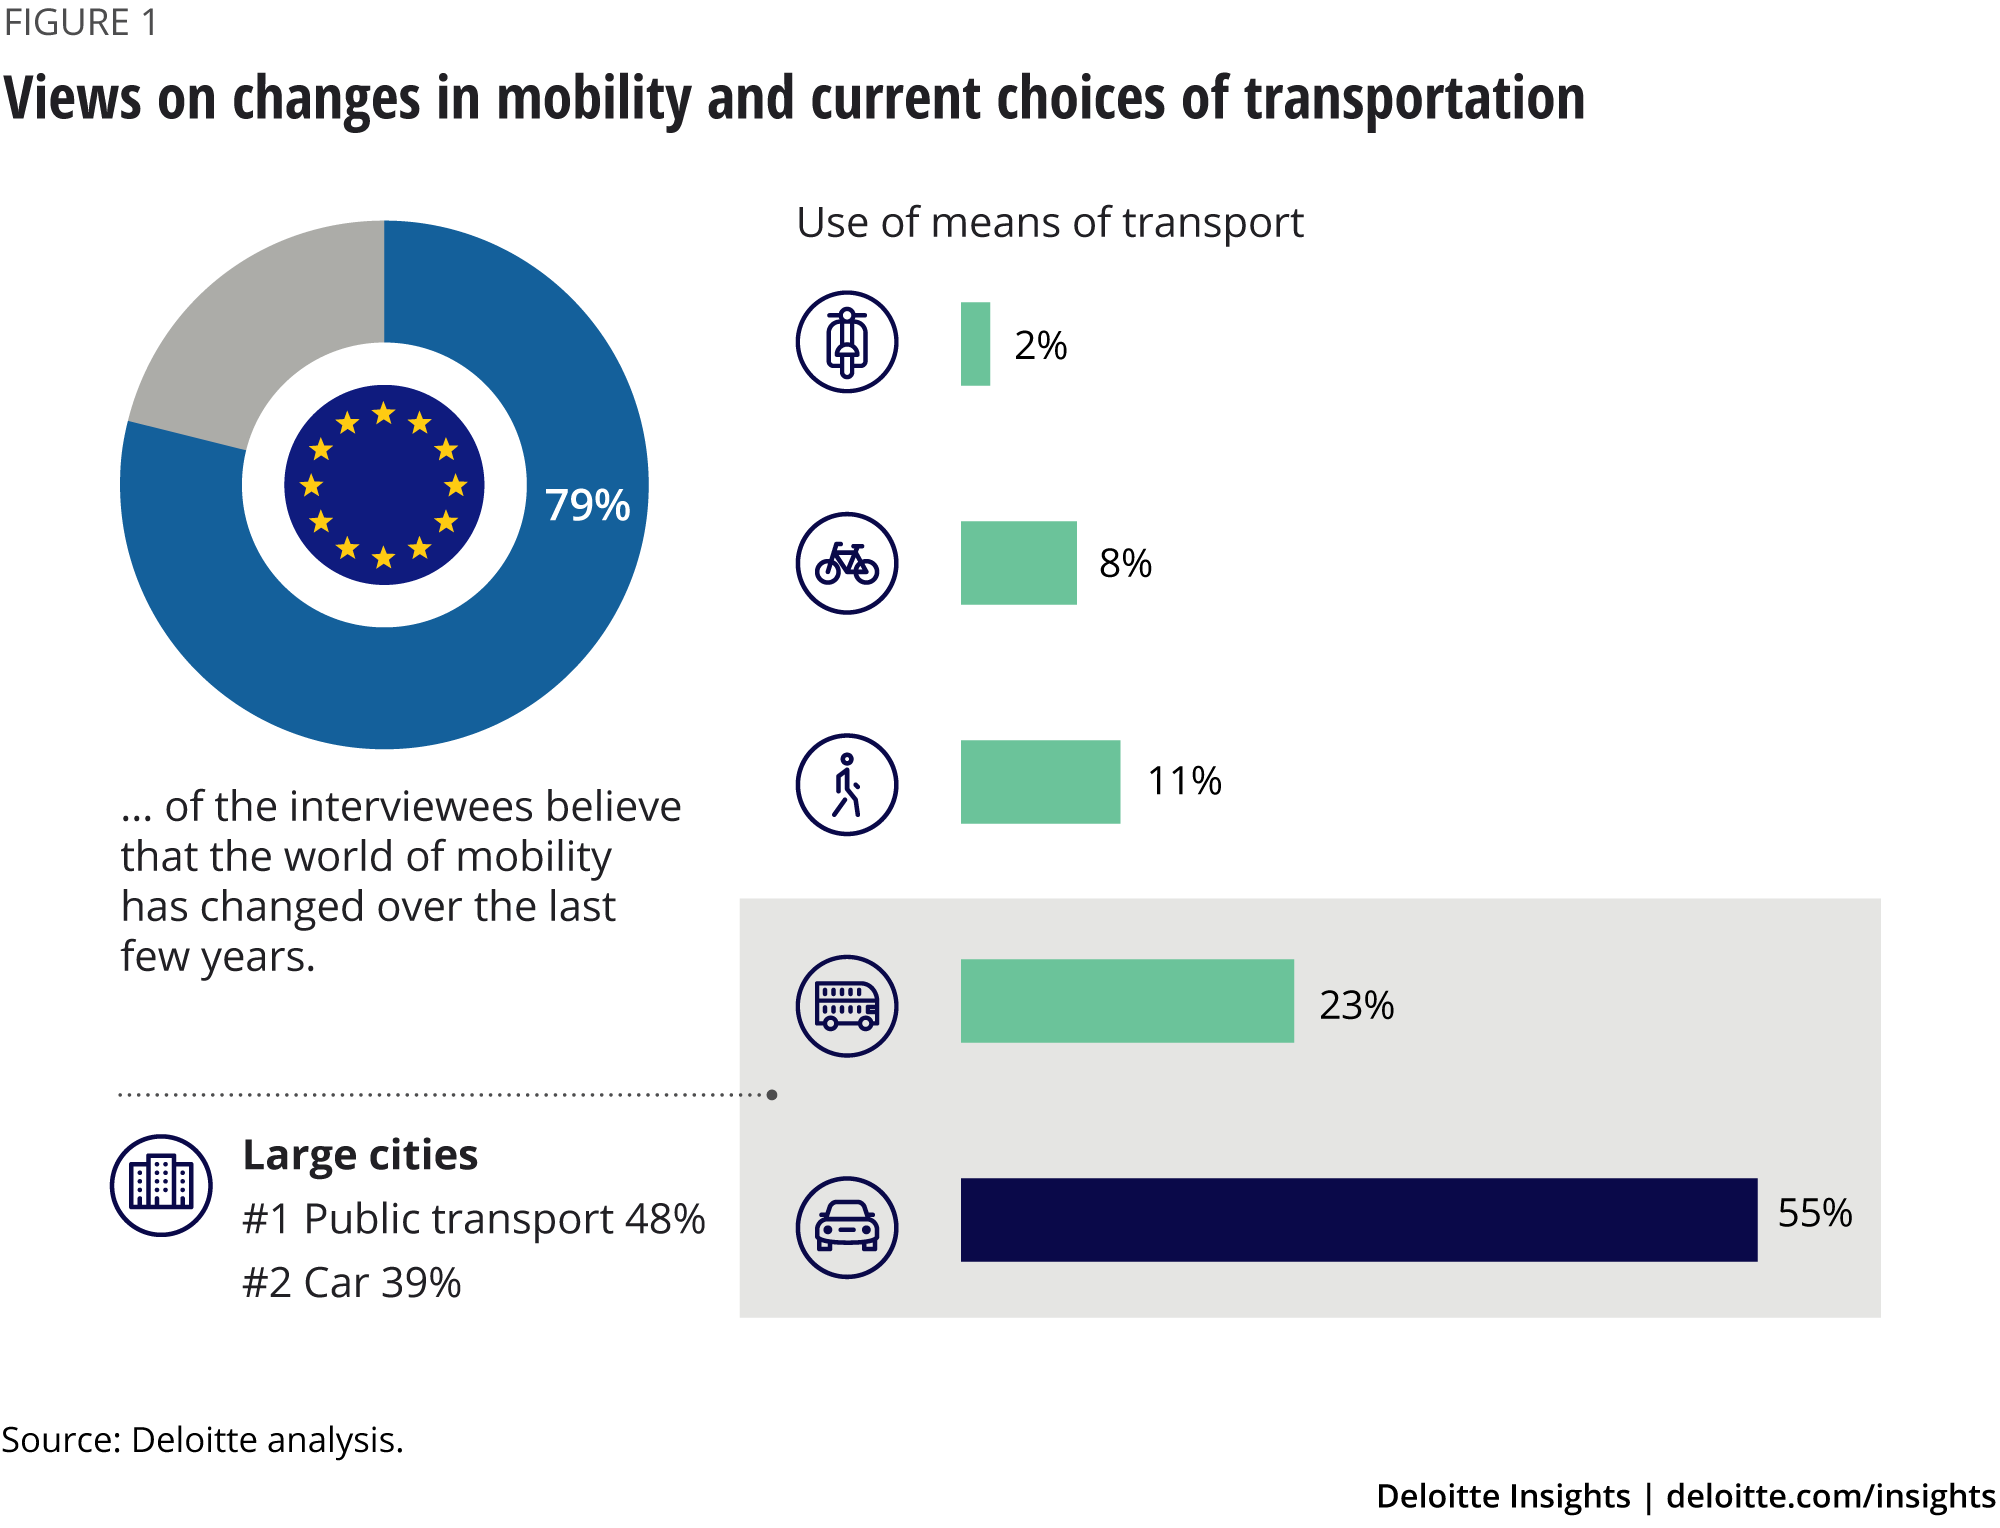 Views on changes in mobility and current choices of transportation